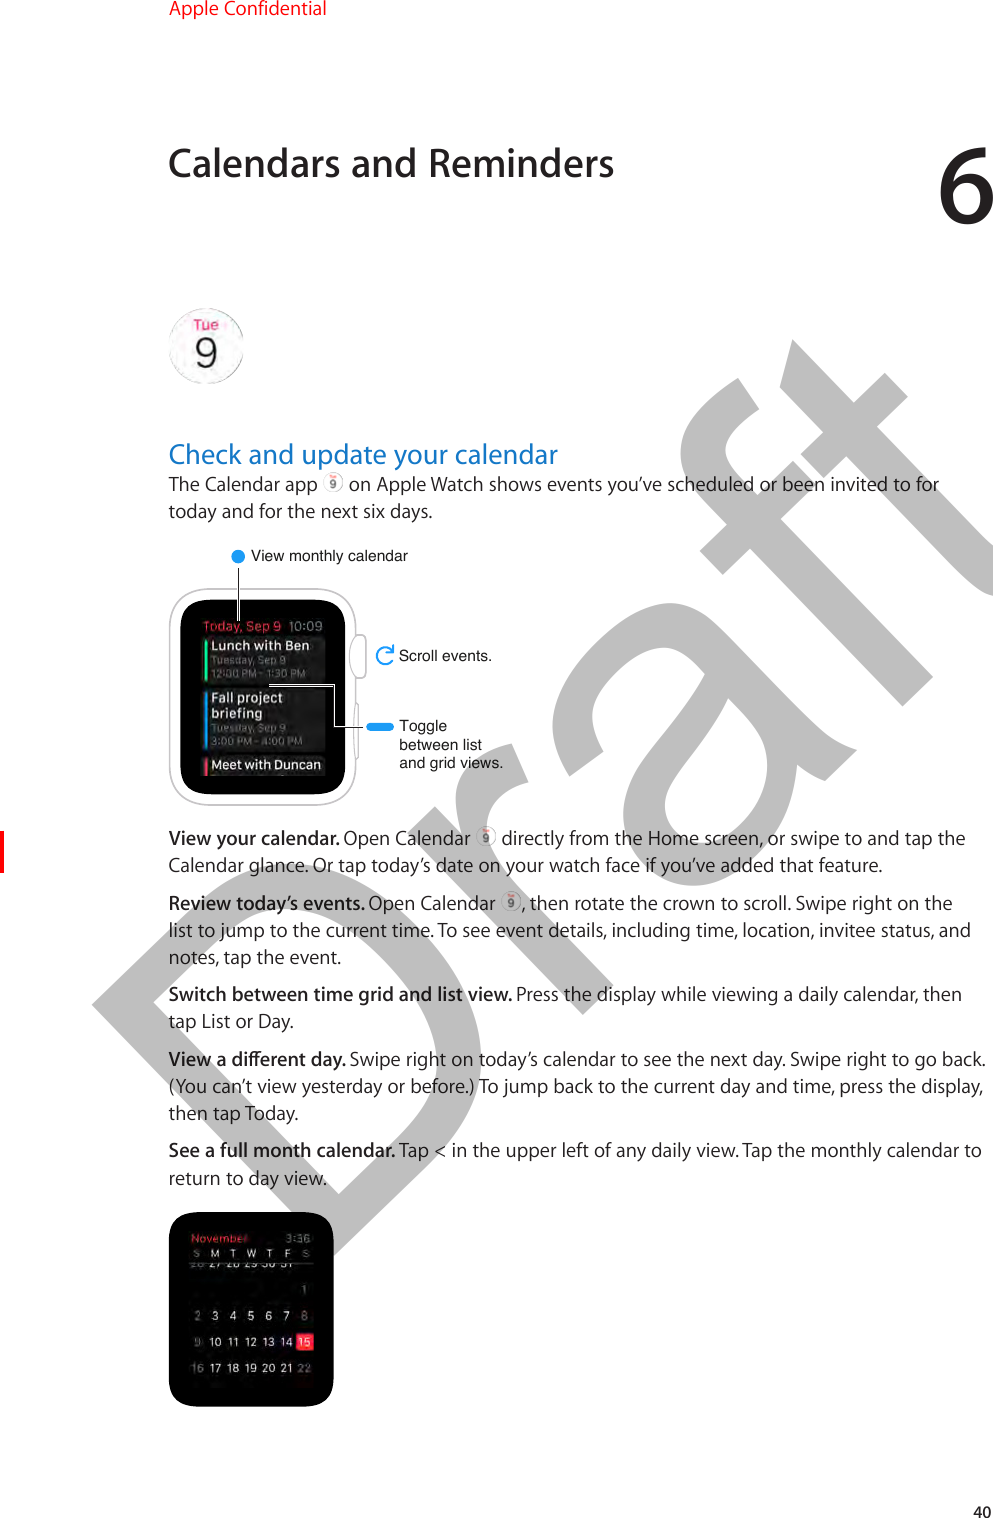 640Check and update your calendarThe Calendar app   on Apple Watch shows events you’ve scheduled or been invited to for today and for the next six days.View monthly calendarScroll events.Togglebetween listand grid views.View your calendar. Open Calendar   directly from the Home screen, or swipe to and tap the Calendar glance. Or tap today’s date on your watch face if you’ve added that feature.Review today’s events. Open Calendar  , then rotate the crown to scroll. Swipe right on the list to jump to the current time. To see event details, including time, location, invitee status, and notes, tap the event.Switch between time grid and list view. Press the display while viewing a daily calendar, then tap List or Day.View a dierent day. Swipe right on today’s calendar to see the next day. Swipe right to go back. (You can’t view yesterday or before.) To jump back to the current day and time, press the display, then tap Today.See a full month calendar. Tap &lt; in the upper left of any daily view. Tap the monthly calendar to return to day view.Calendars and RemindersApple Confidential  100% resize factorDraft